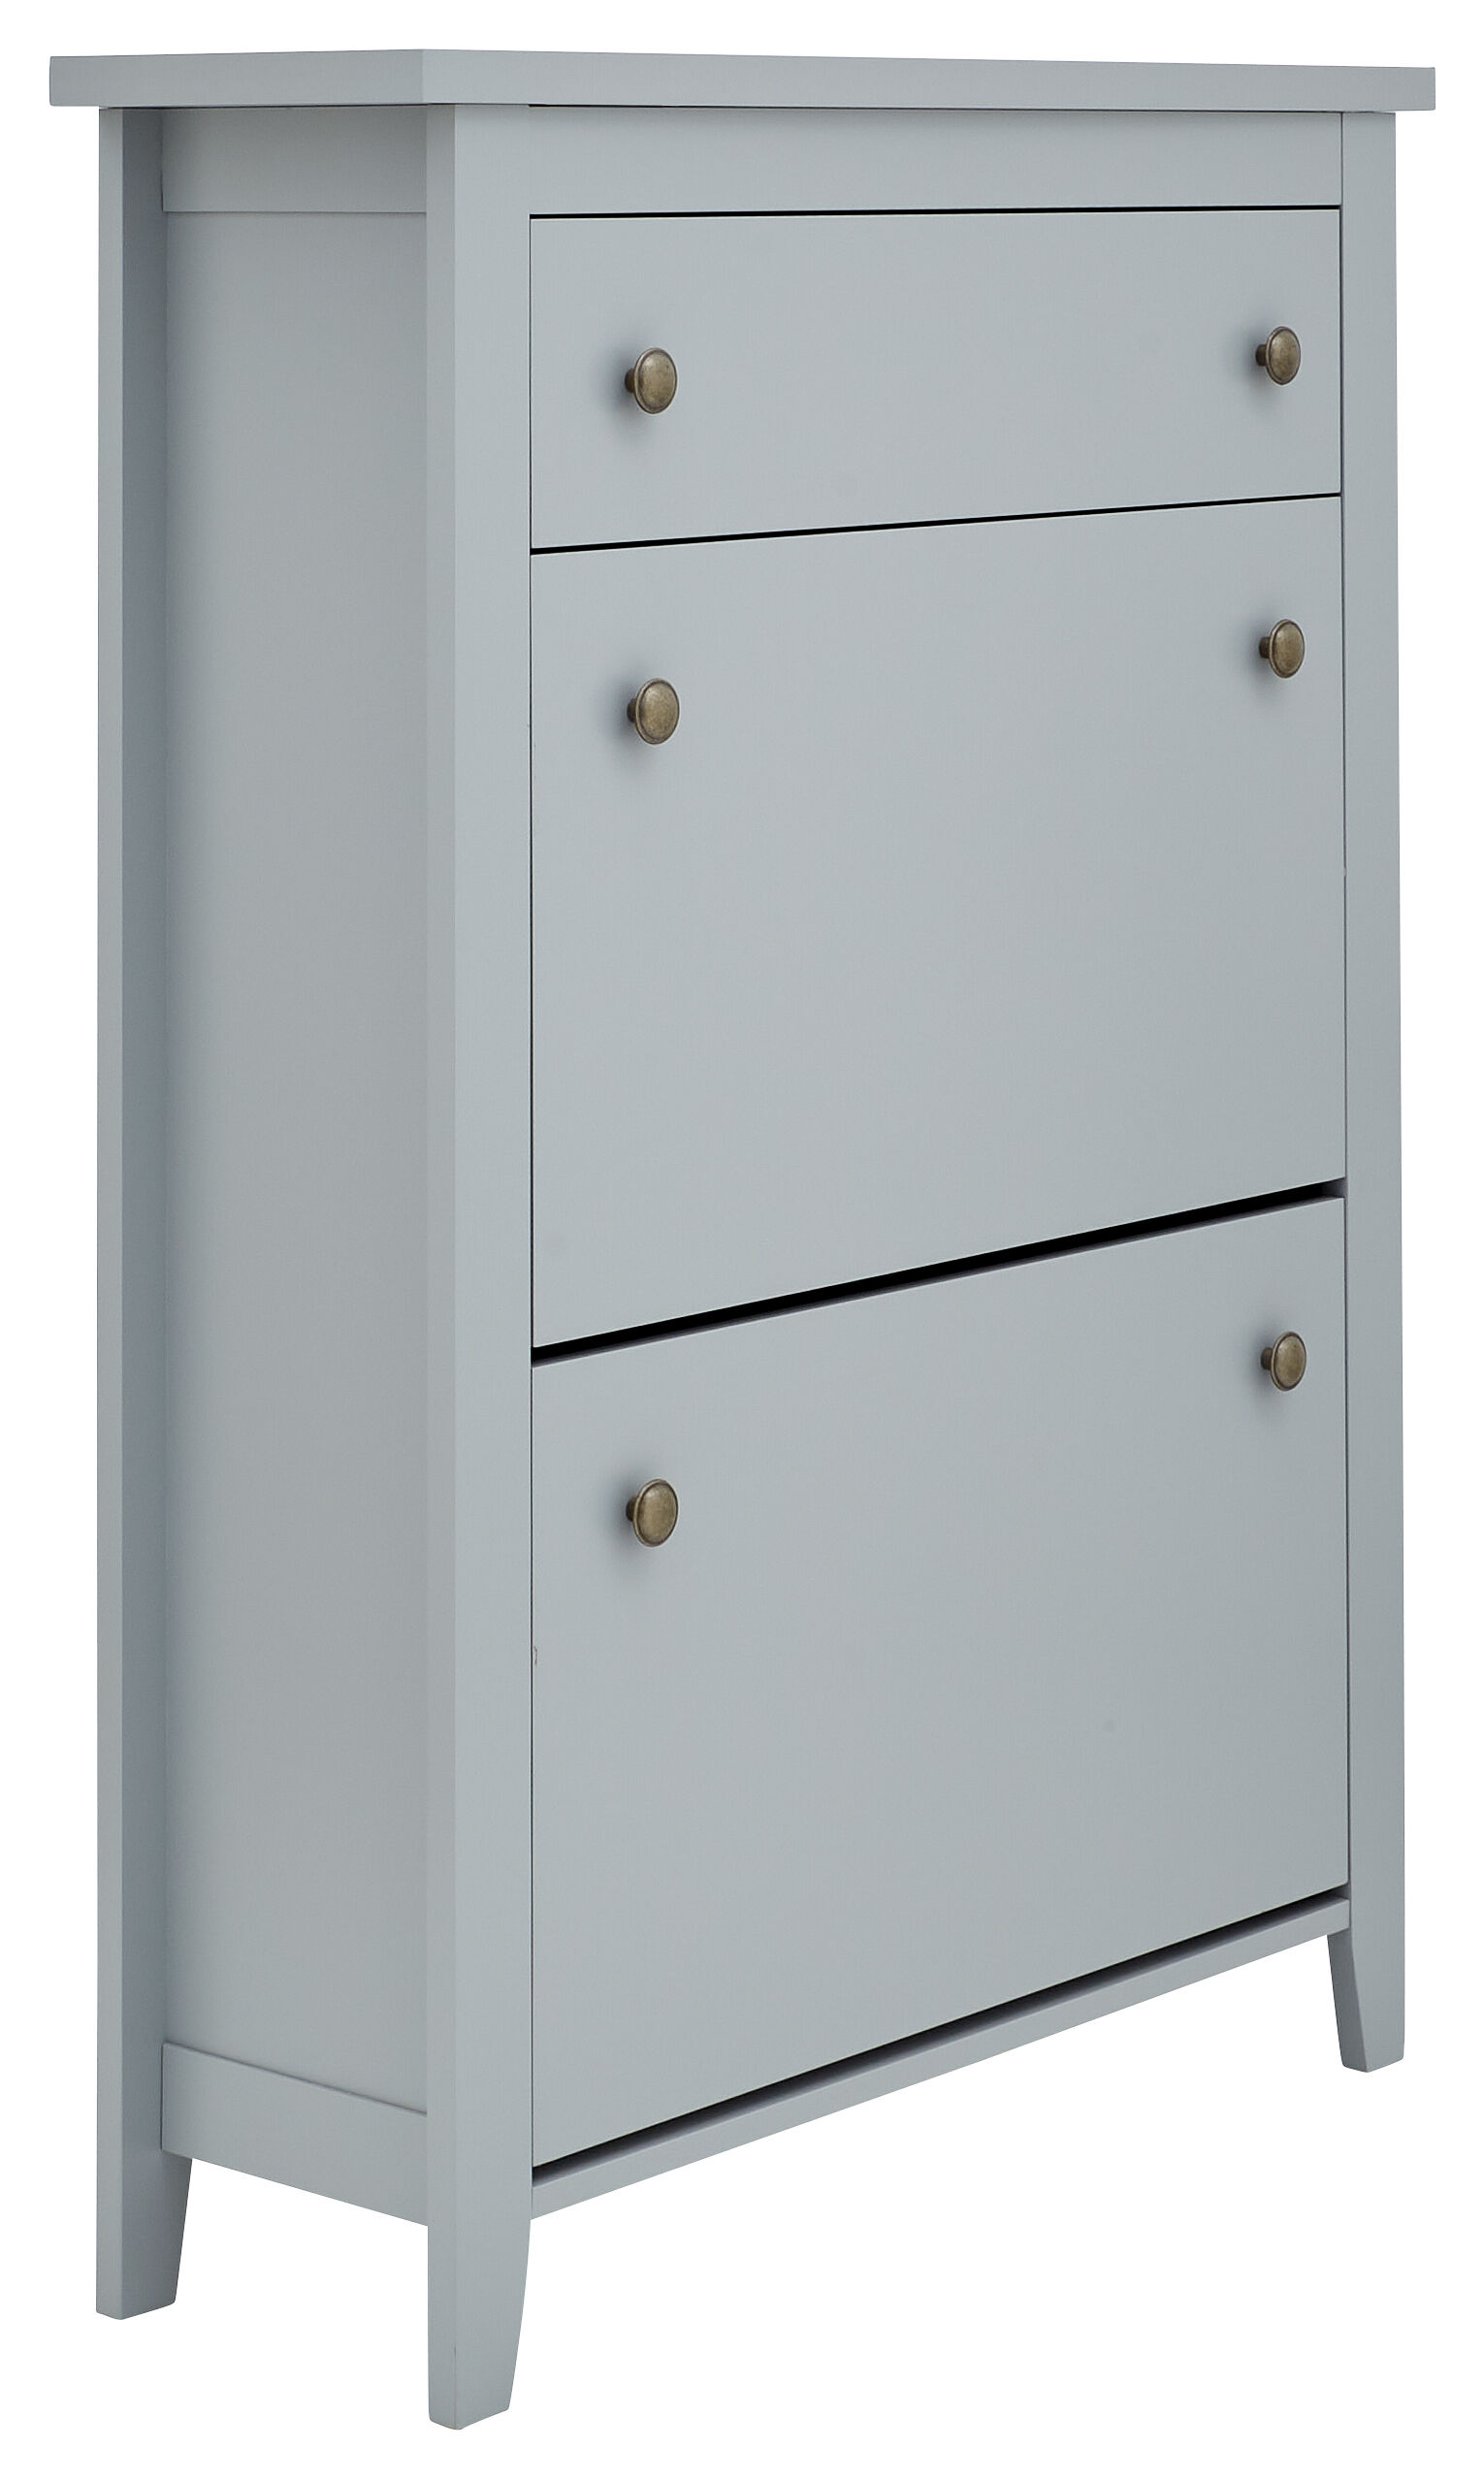 Deluxe Storage & Seating Two Tier Shoe Cabinet   Grey   Self Assembly